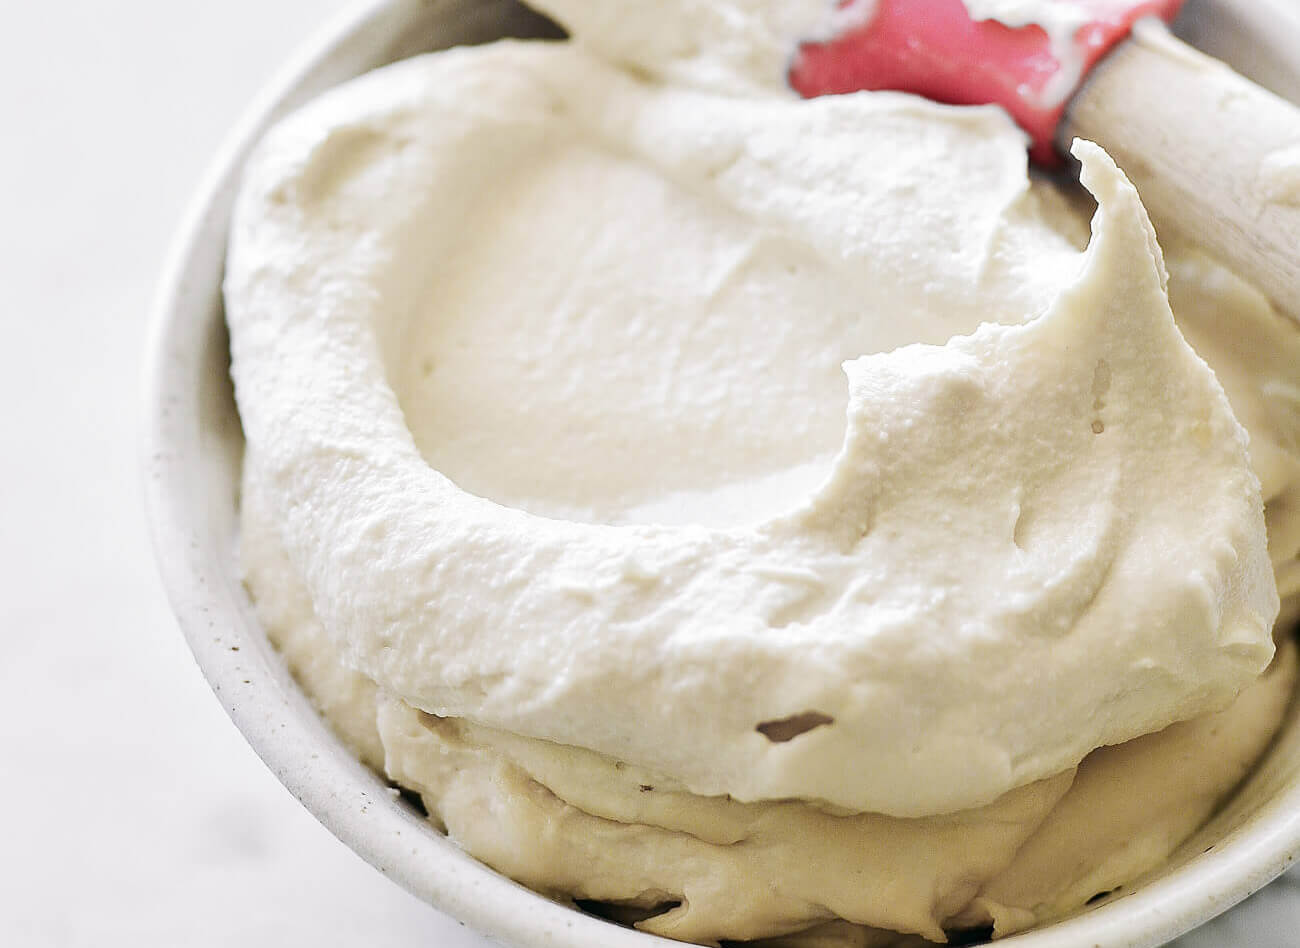 Easy dairy free, vegan, and paleo cream cheese recipe. Soy free, made in 5 minutes, and able to store in the fridge for 1 week. Addictively creamy and a perfect addition to any recipe- savory or sweet! Paleo cream cheese recipe. Easy paleo cheese recipe. Dairy free cheese recipe. Cashew cream cheese recipe. Best cashew cheese recipe. Easy vegan cheese recipe. Best dairy free cheese ideas. Dairy free cream cheese. Best paleo raw dairy free cheese. raw cheese recipes. cashew cheese recipes.